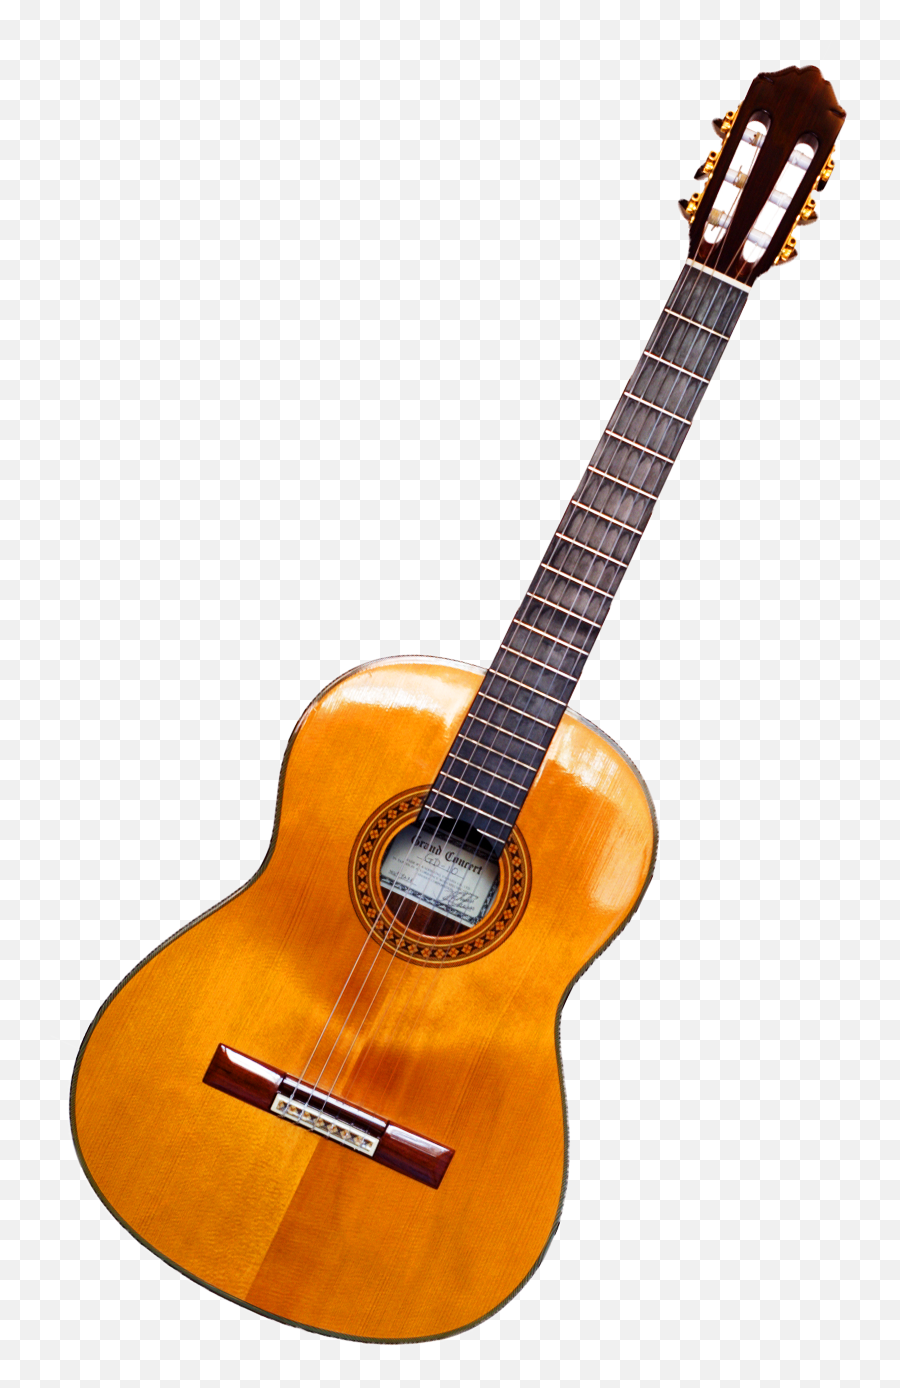 What Is The Point Of Life When Thereu0027s No Love - Quora Classical Guitar Png Emoji,Intense Emotion Pain Quote Tuesdays With Morrie